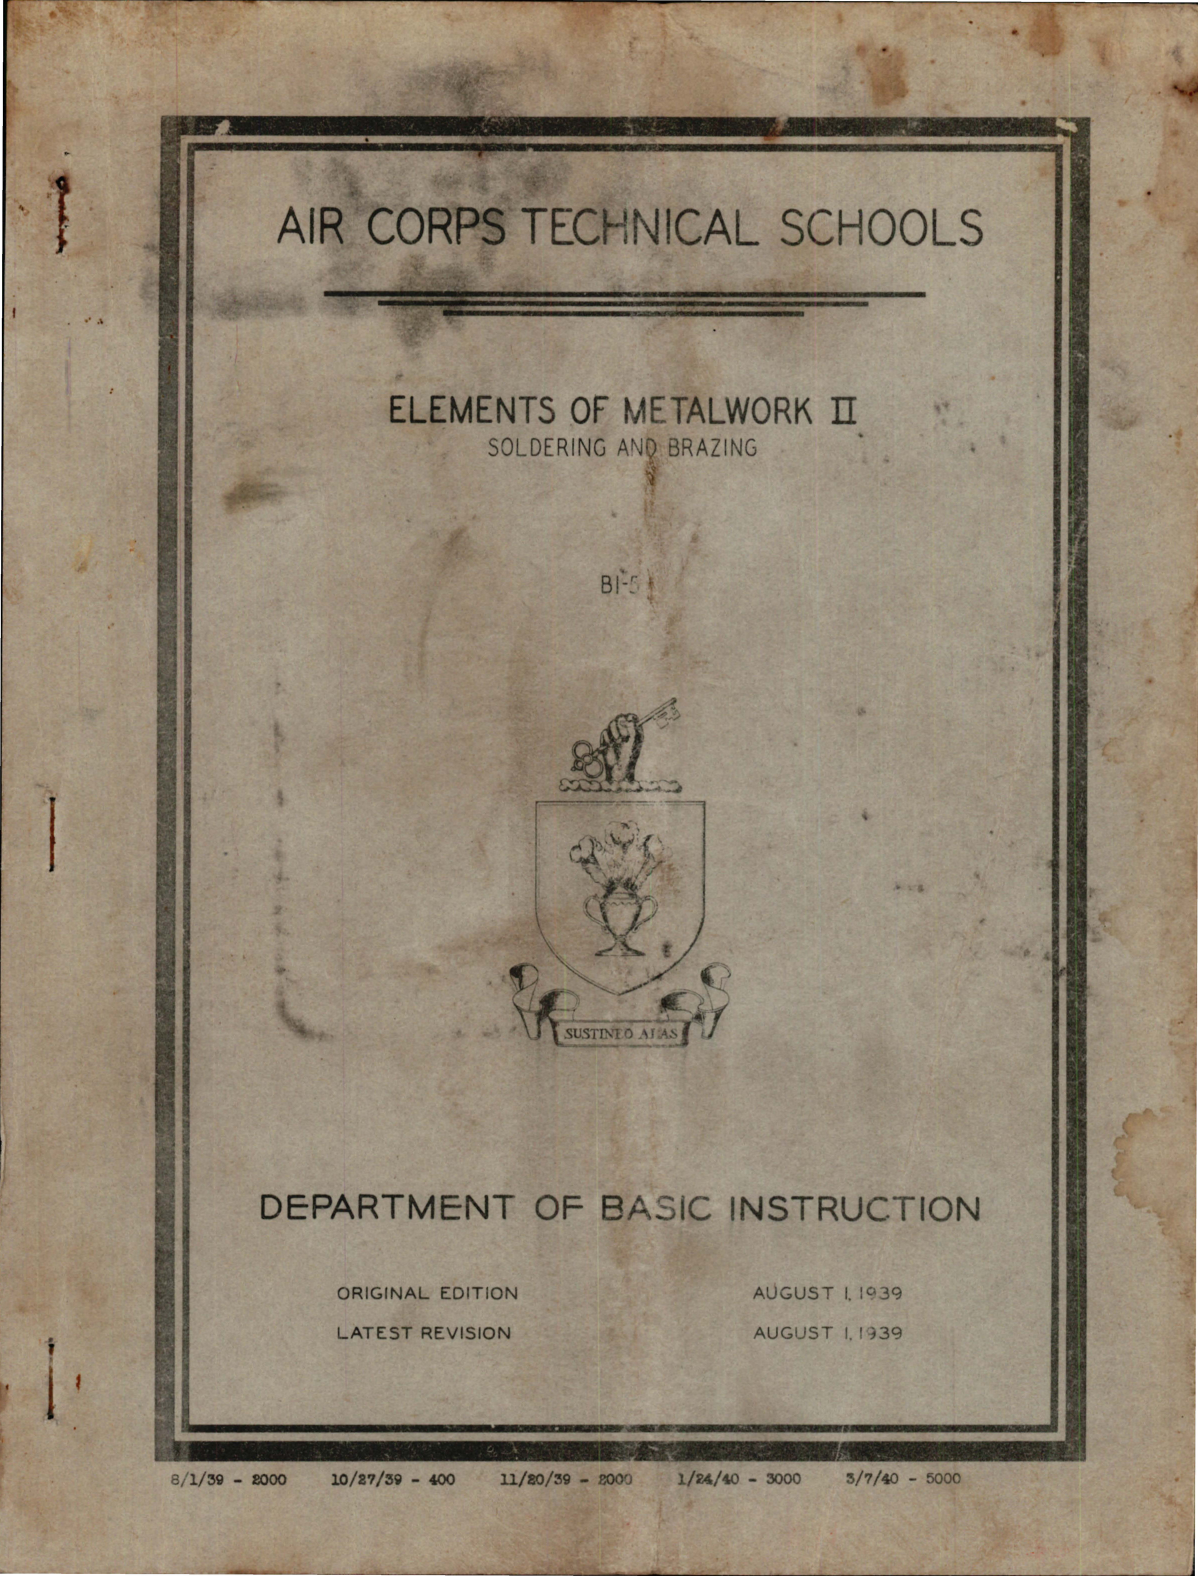 Sample page 1 from AirCorps Library document: Elements of Metalwork II for Soldering and Brazing 